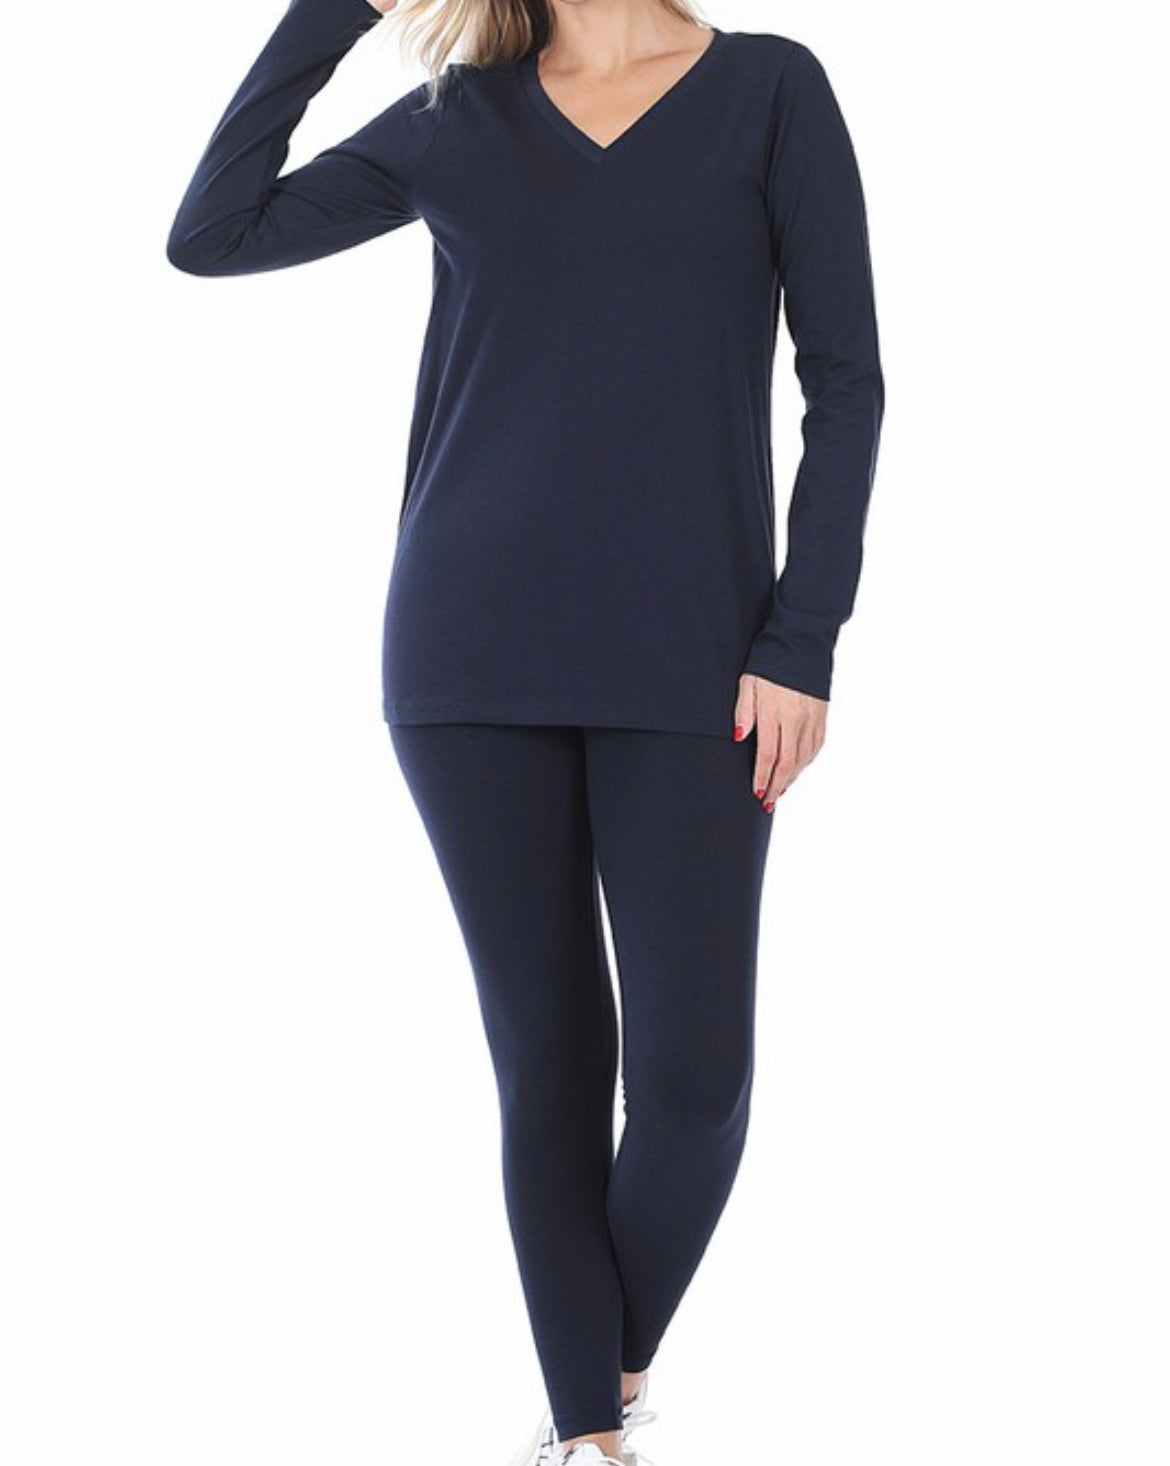 Navy Colored 2 piece cotton leggings set with v-neck top and long sleeves